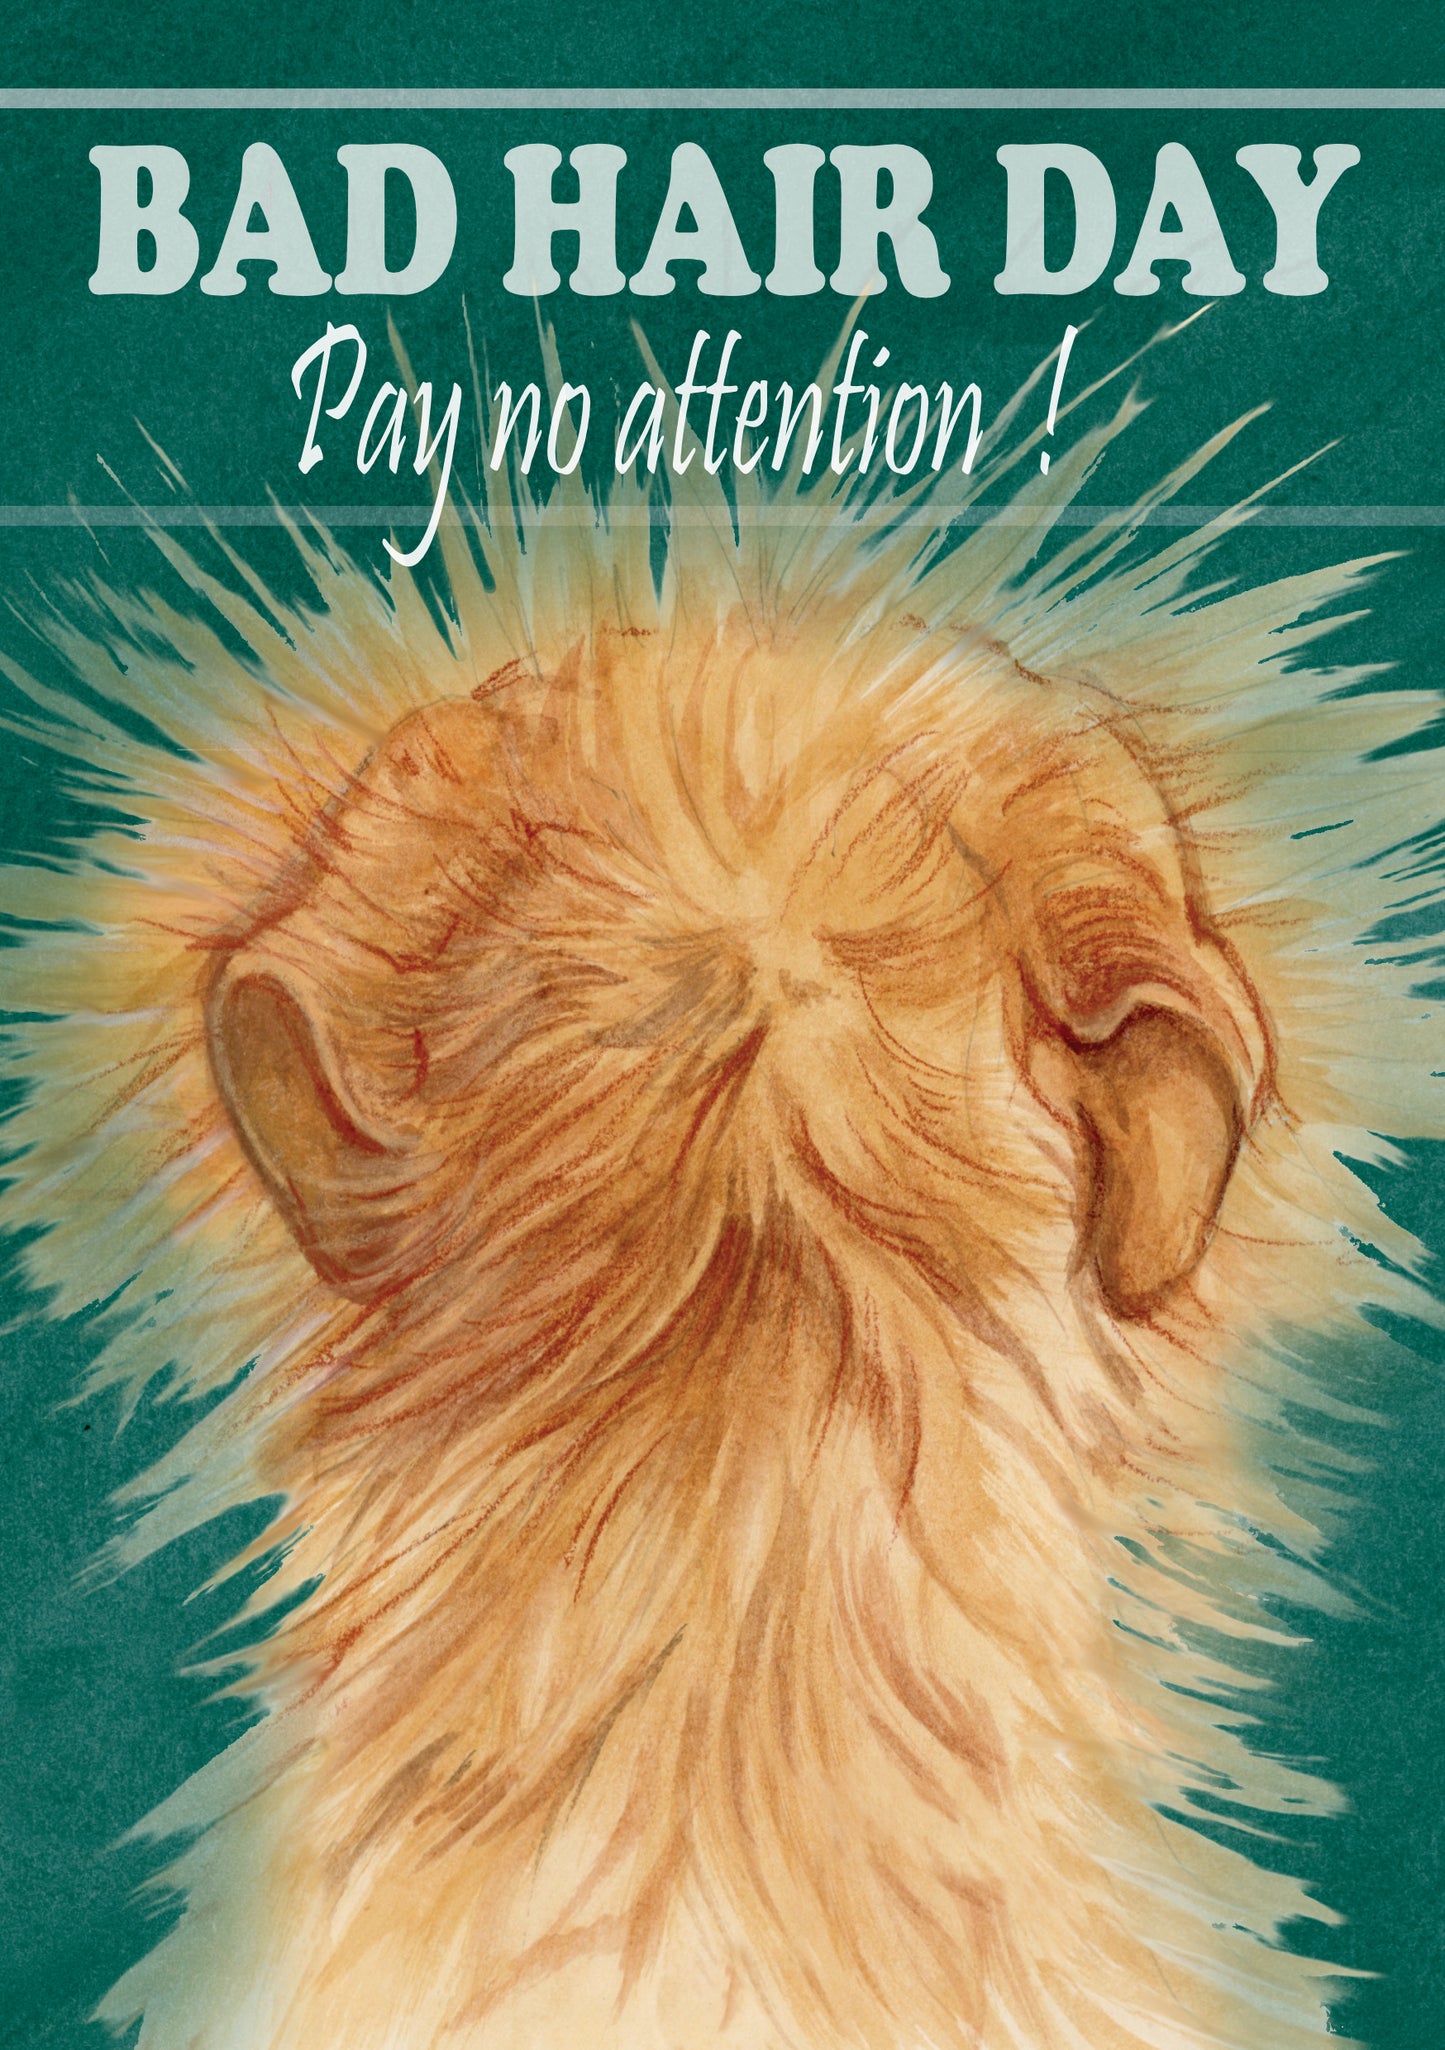 T-shirt "Bad Hair Day - "Pay no attention".